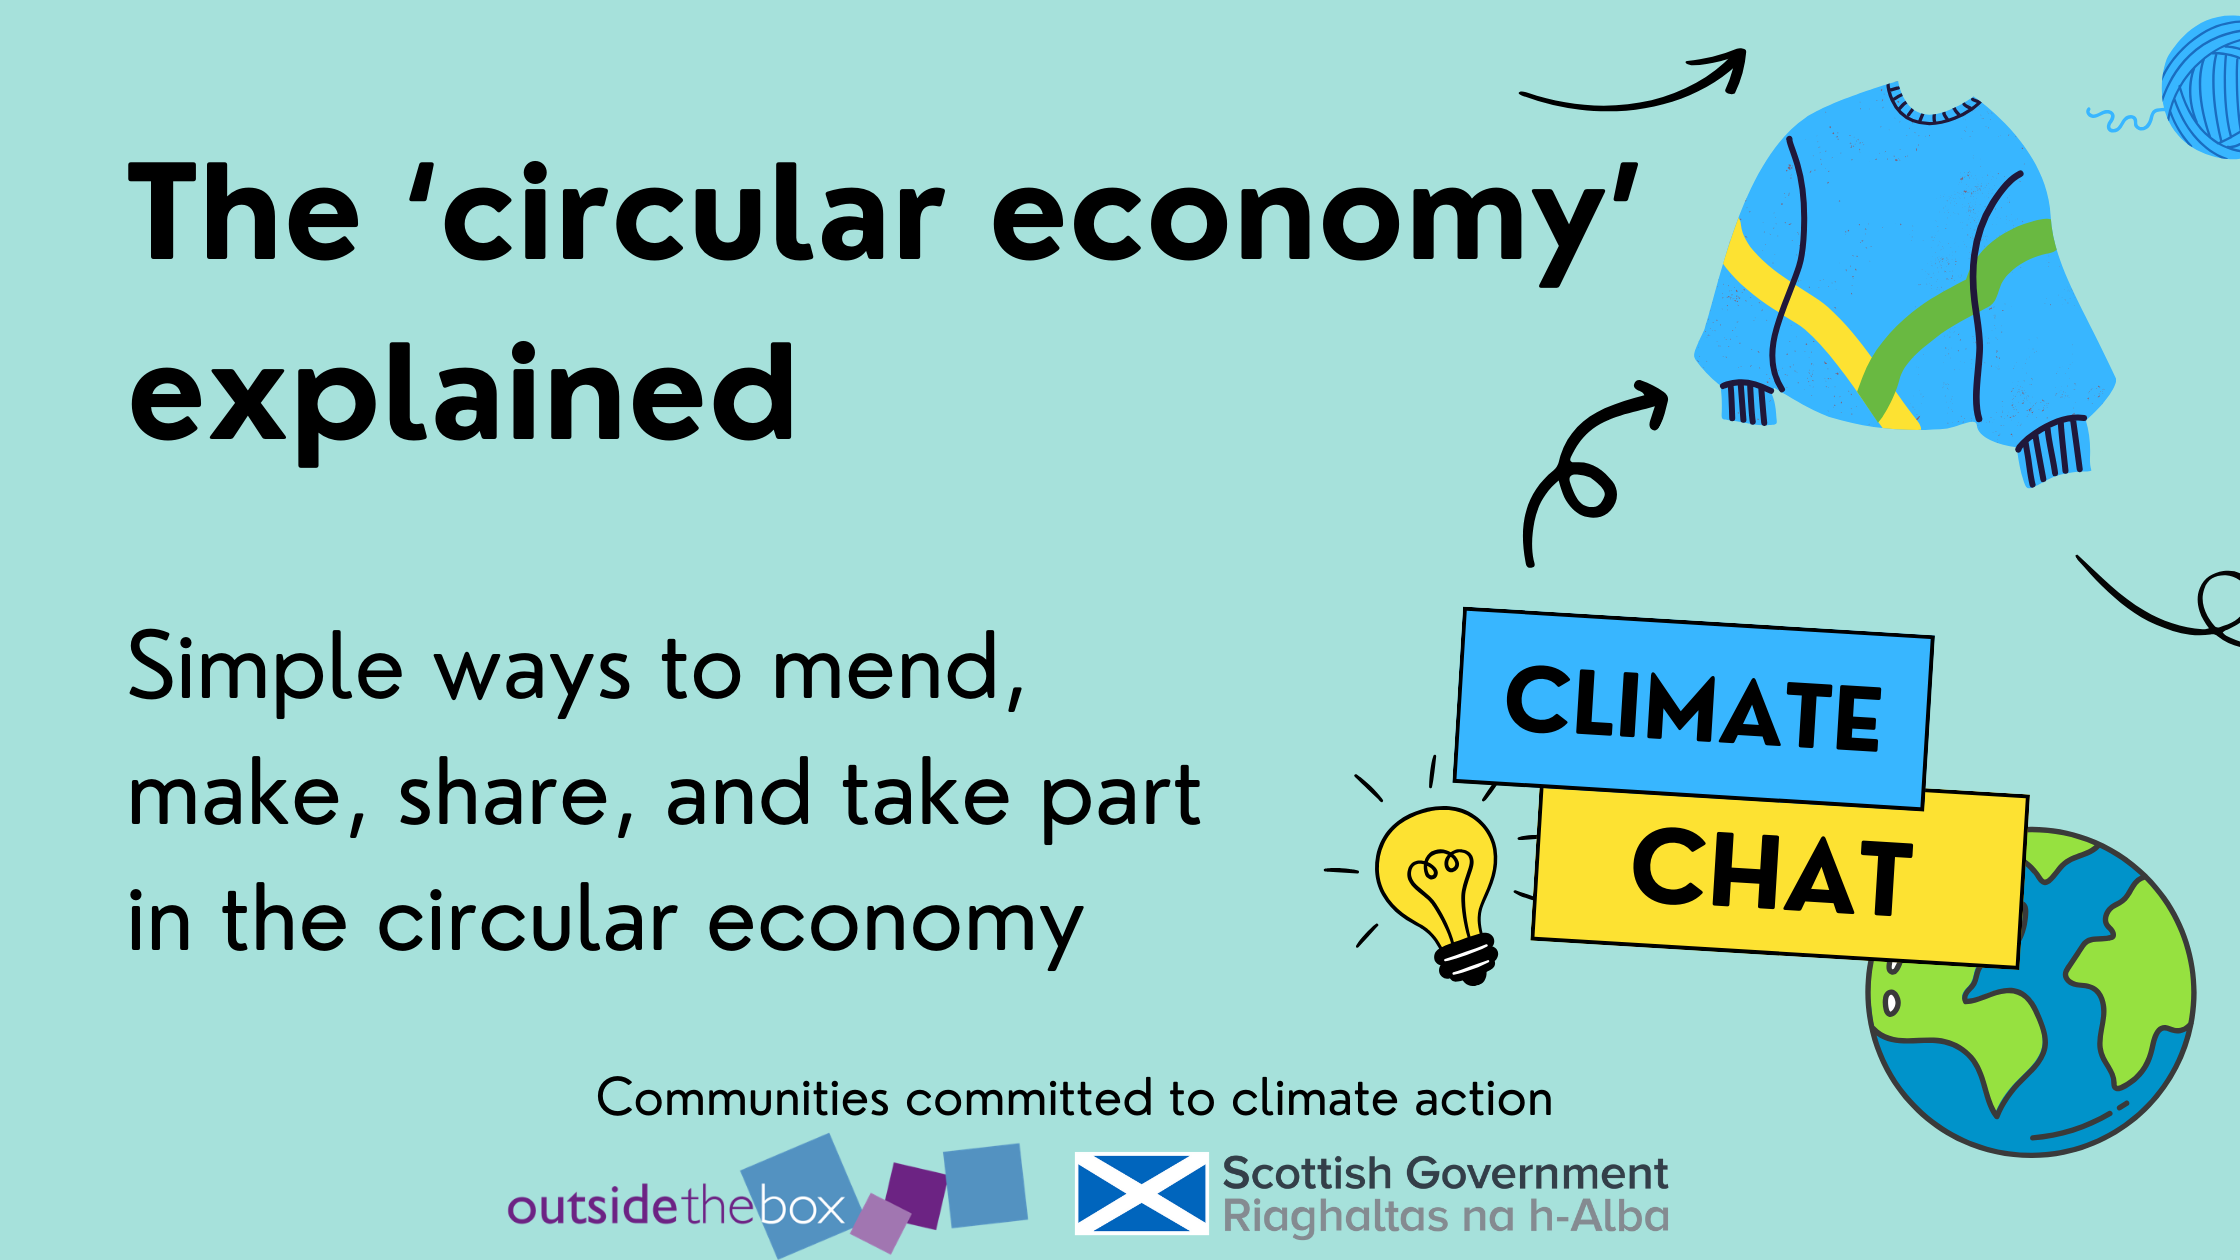 The circular economy explained. Simple ways to mend, make, share and take part in the circular economy